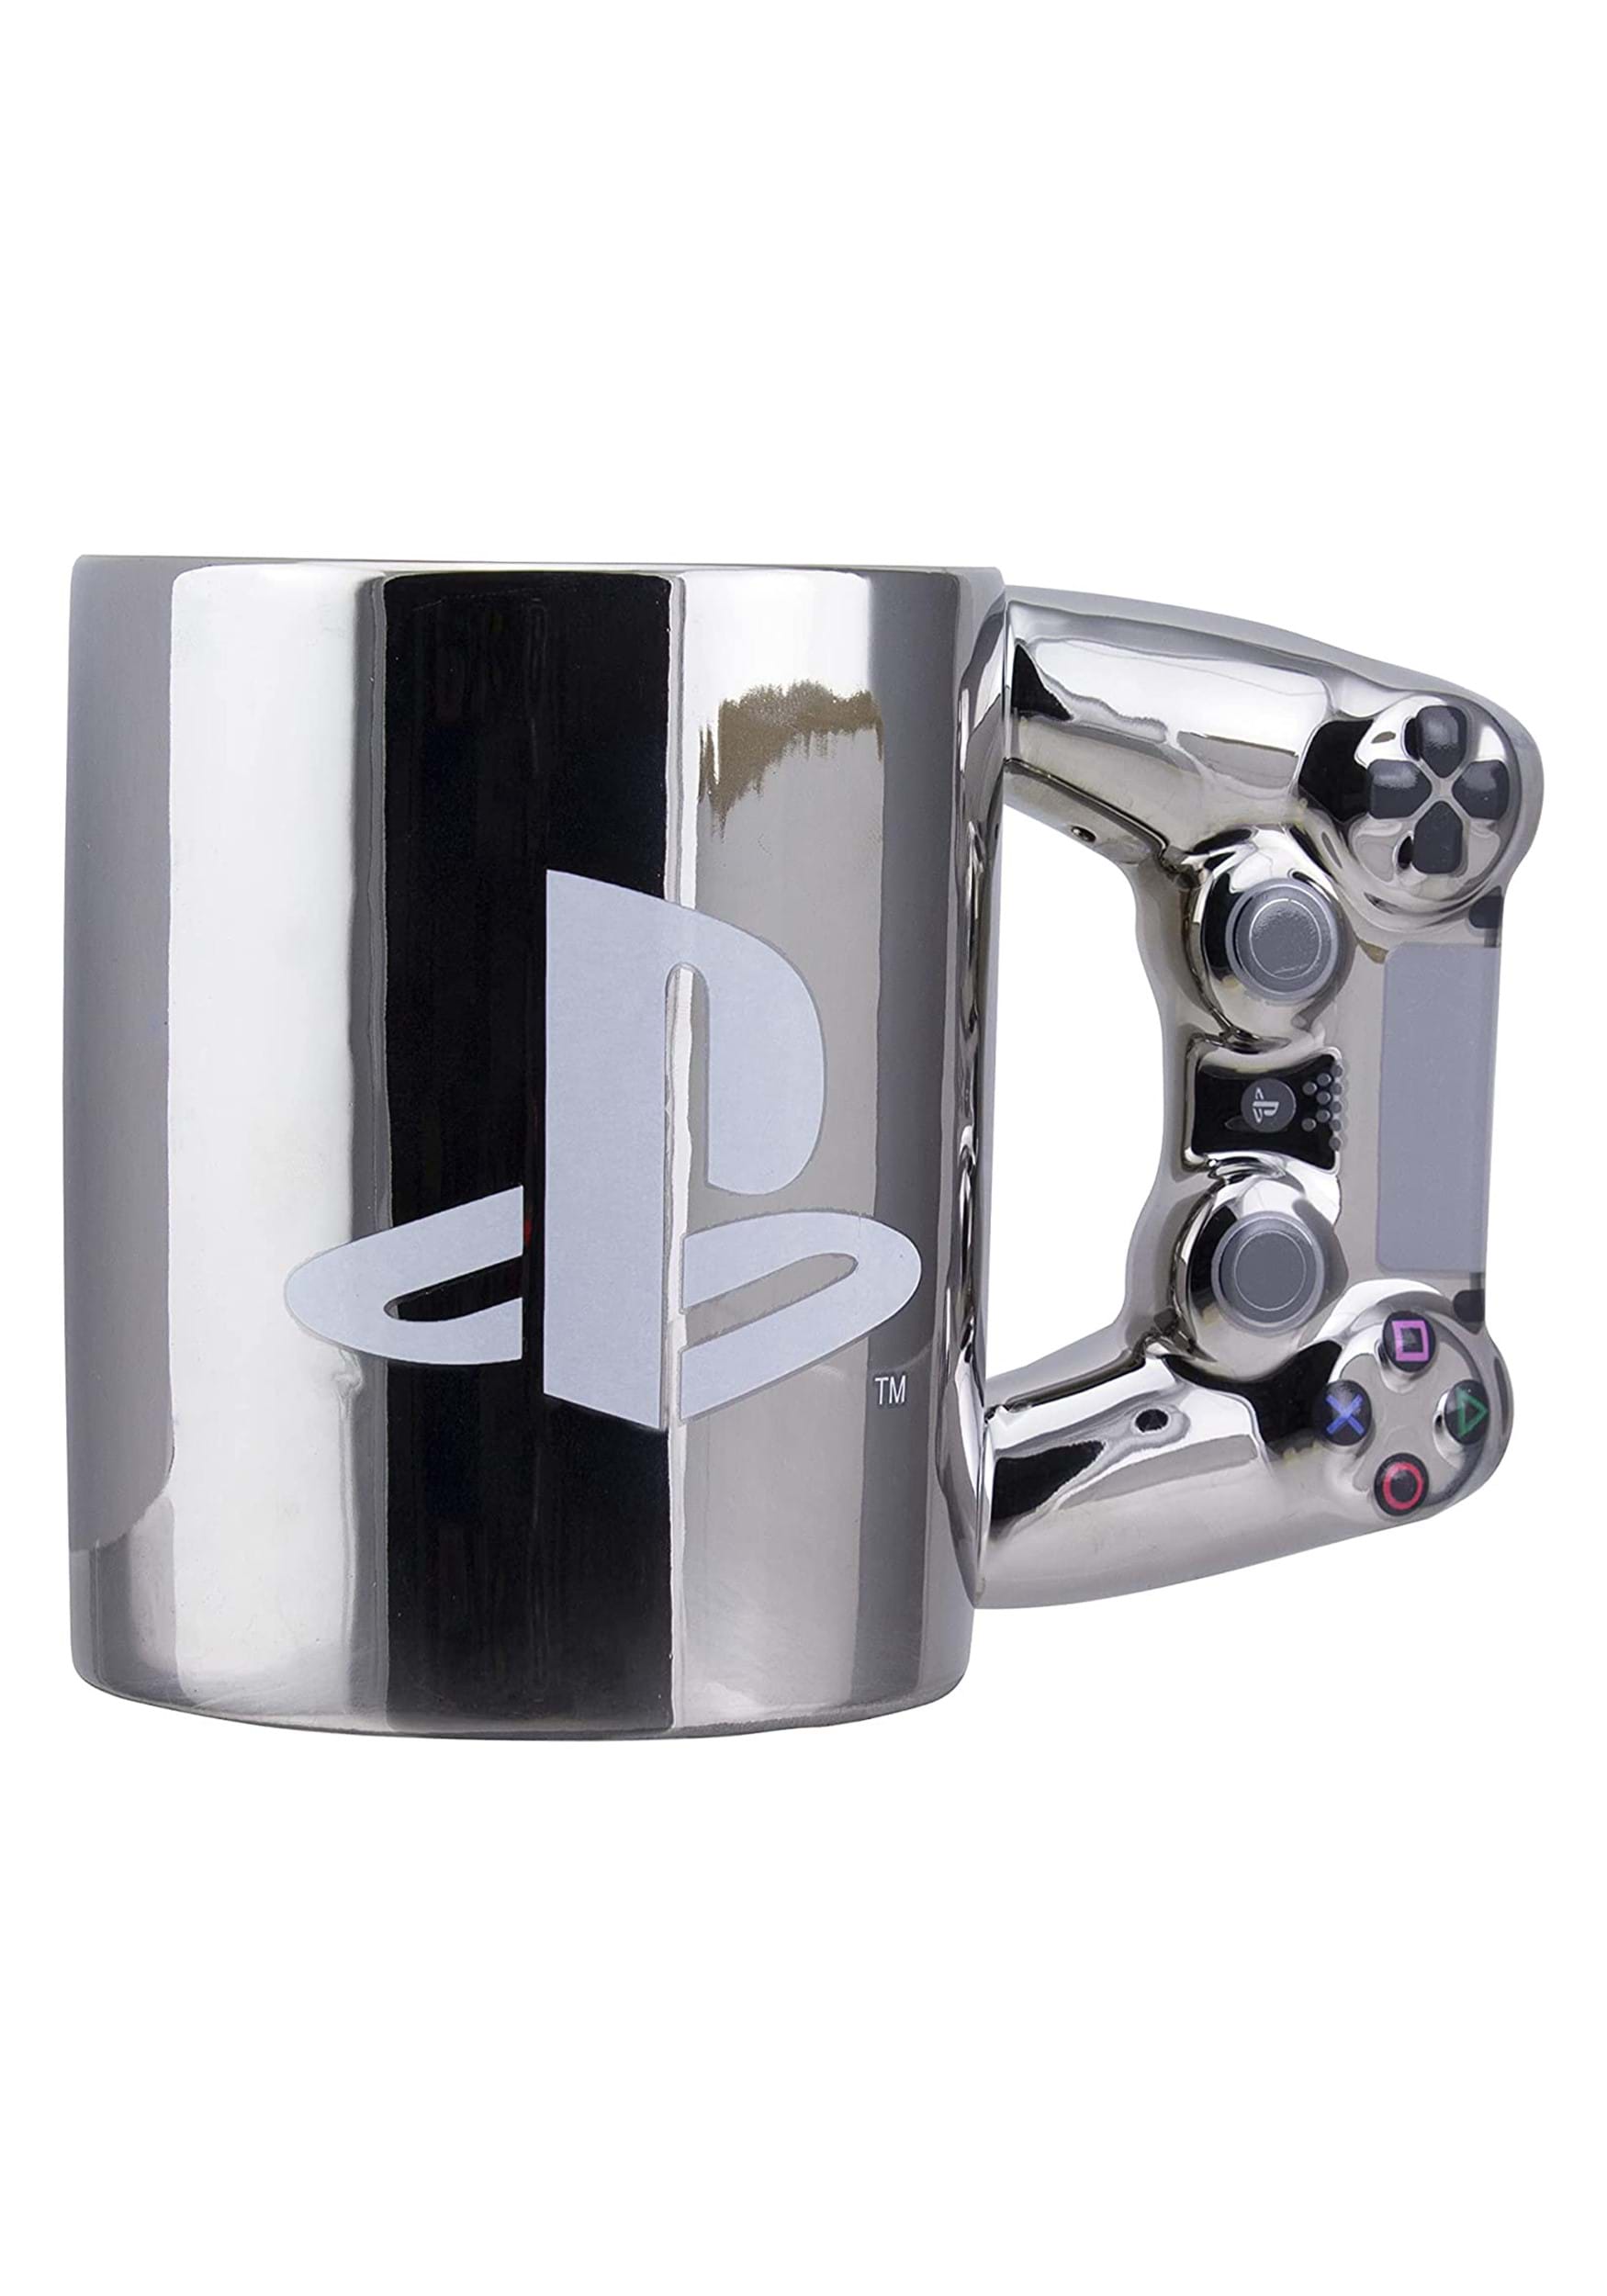 https://images.fun.com/products/82544/1-1/playstation-ps4-silver-controller-mug.jpg